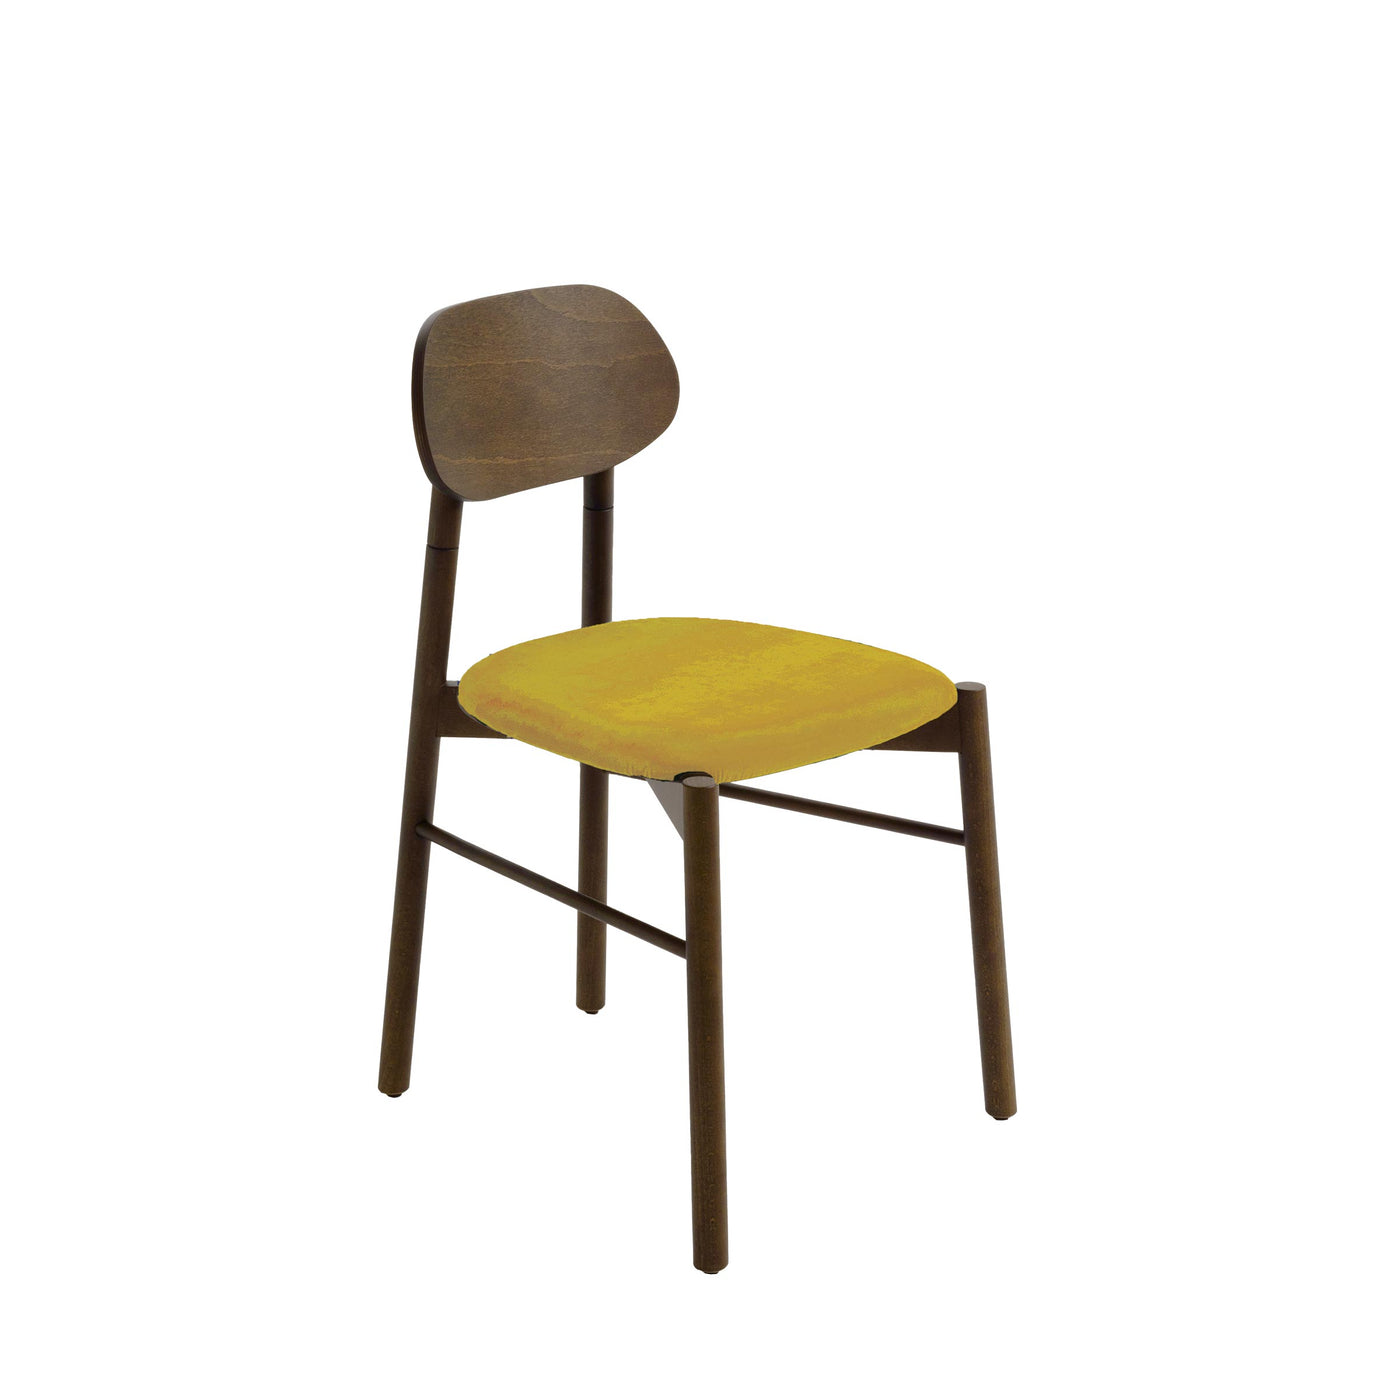 Upholstered Dining Chair BOKKEN by Bellavista + Piccini for Colé Italia 011